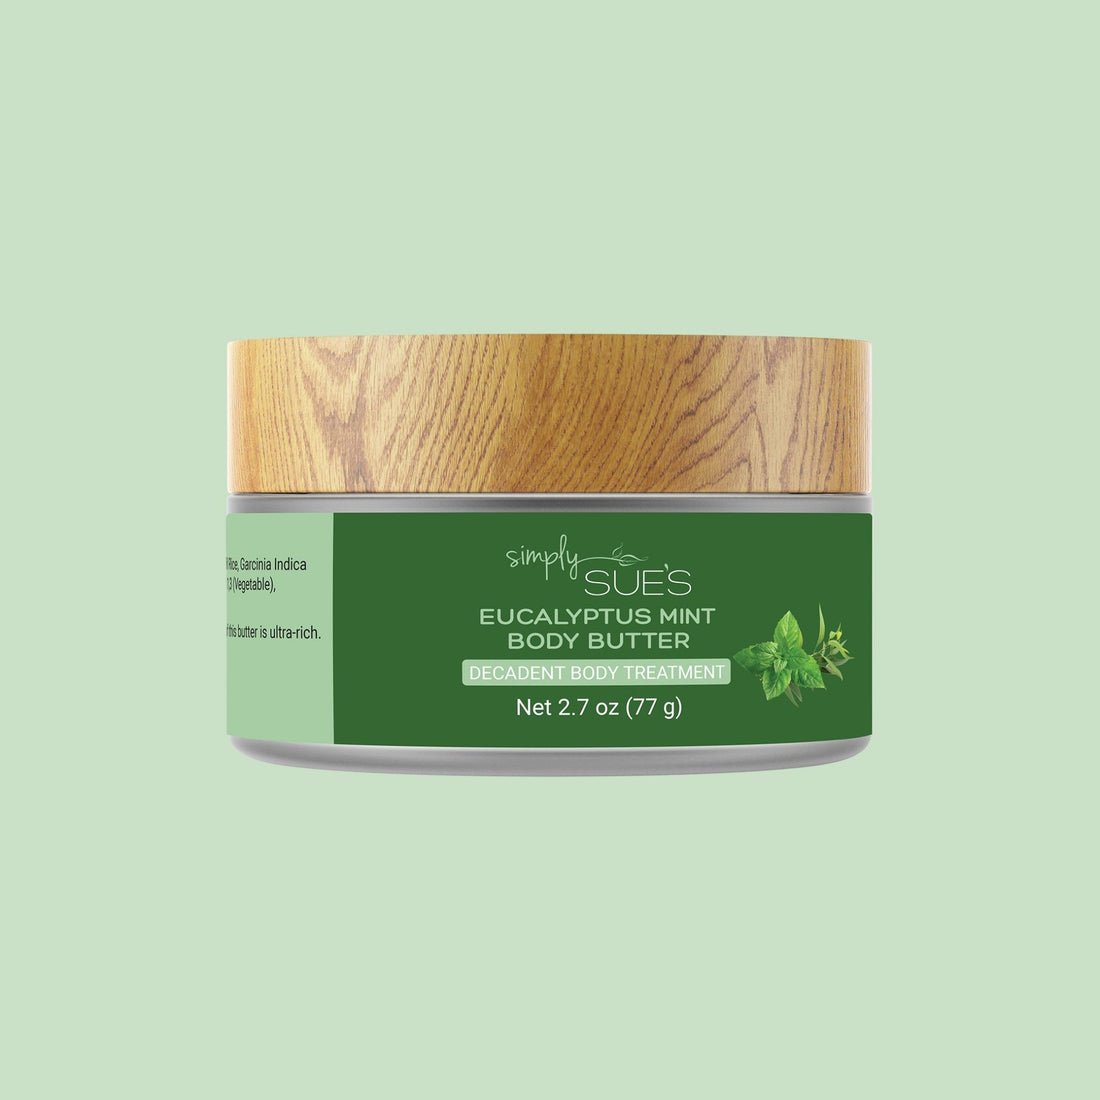 Eucalyptus Mint Body Butter for dry skin, synthetic fragrance free beautifully packaged in a recyclable glass jar with bamboo cap